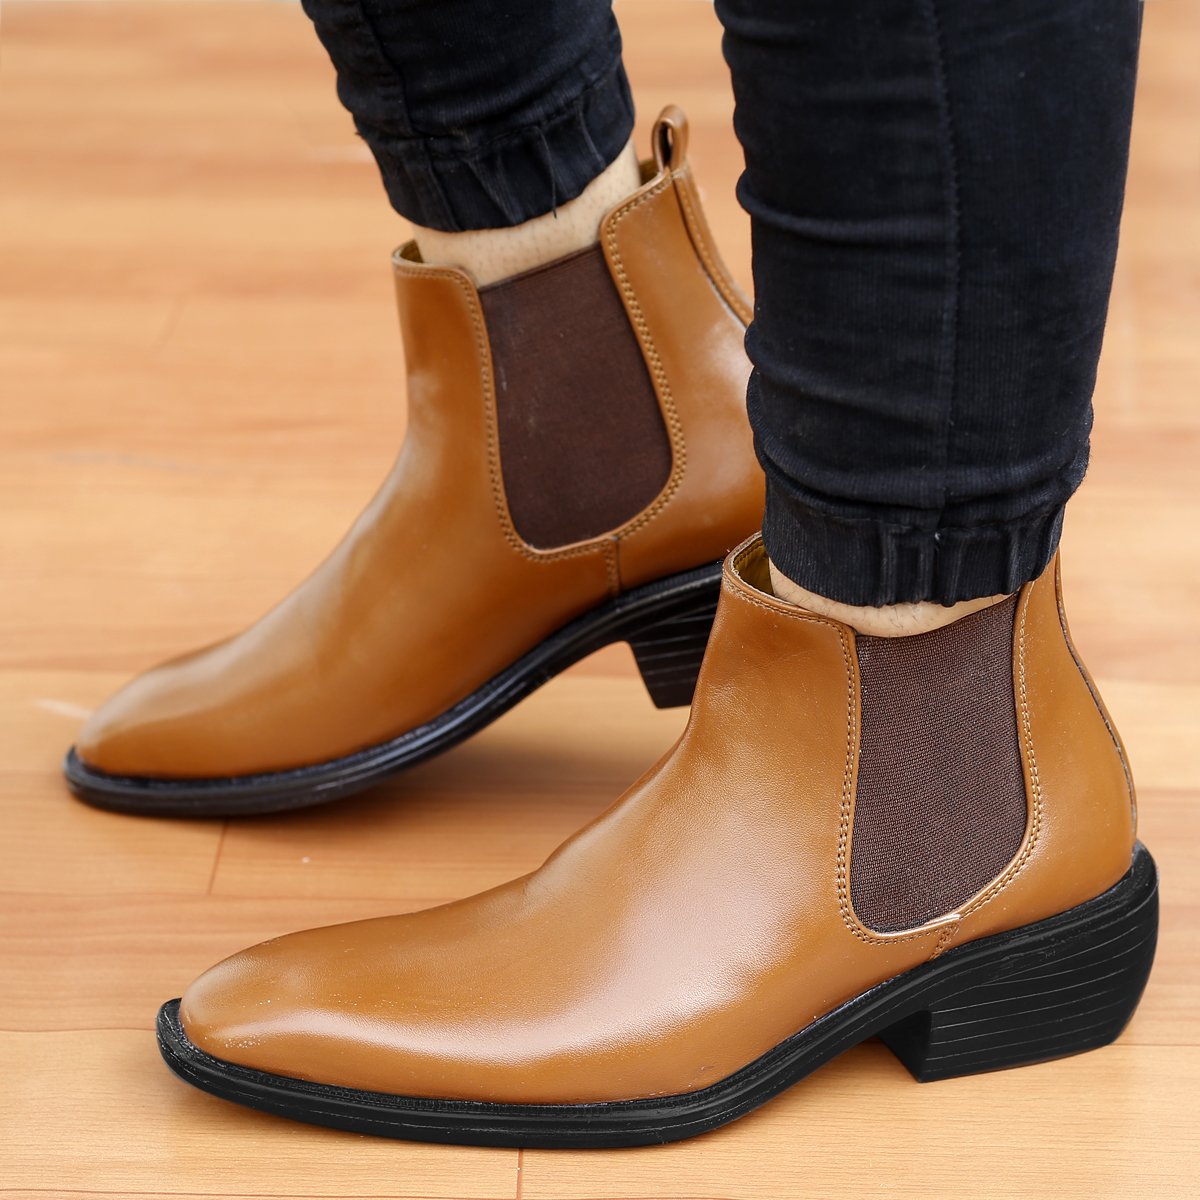 Men's Stylish Tan Formal and Casual Wear British Chelsea Ankle Boots